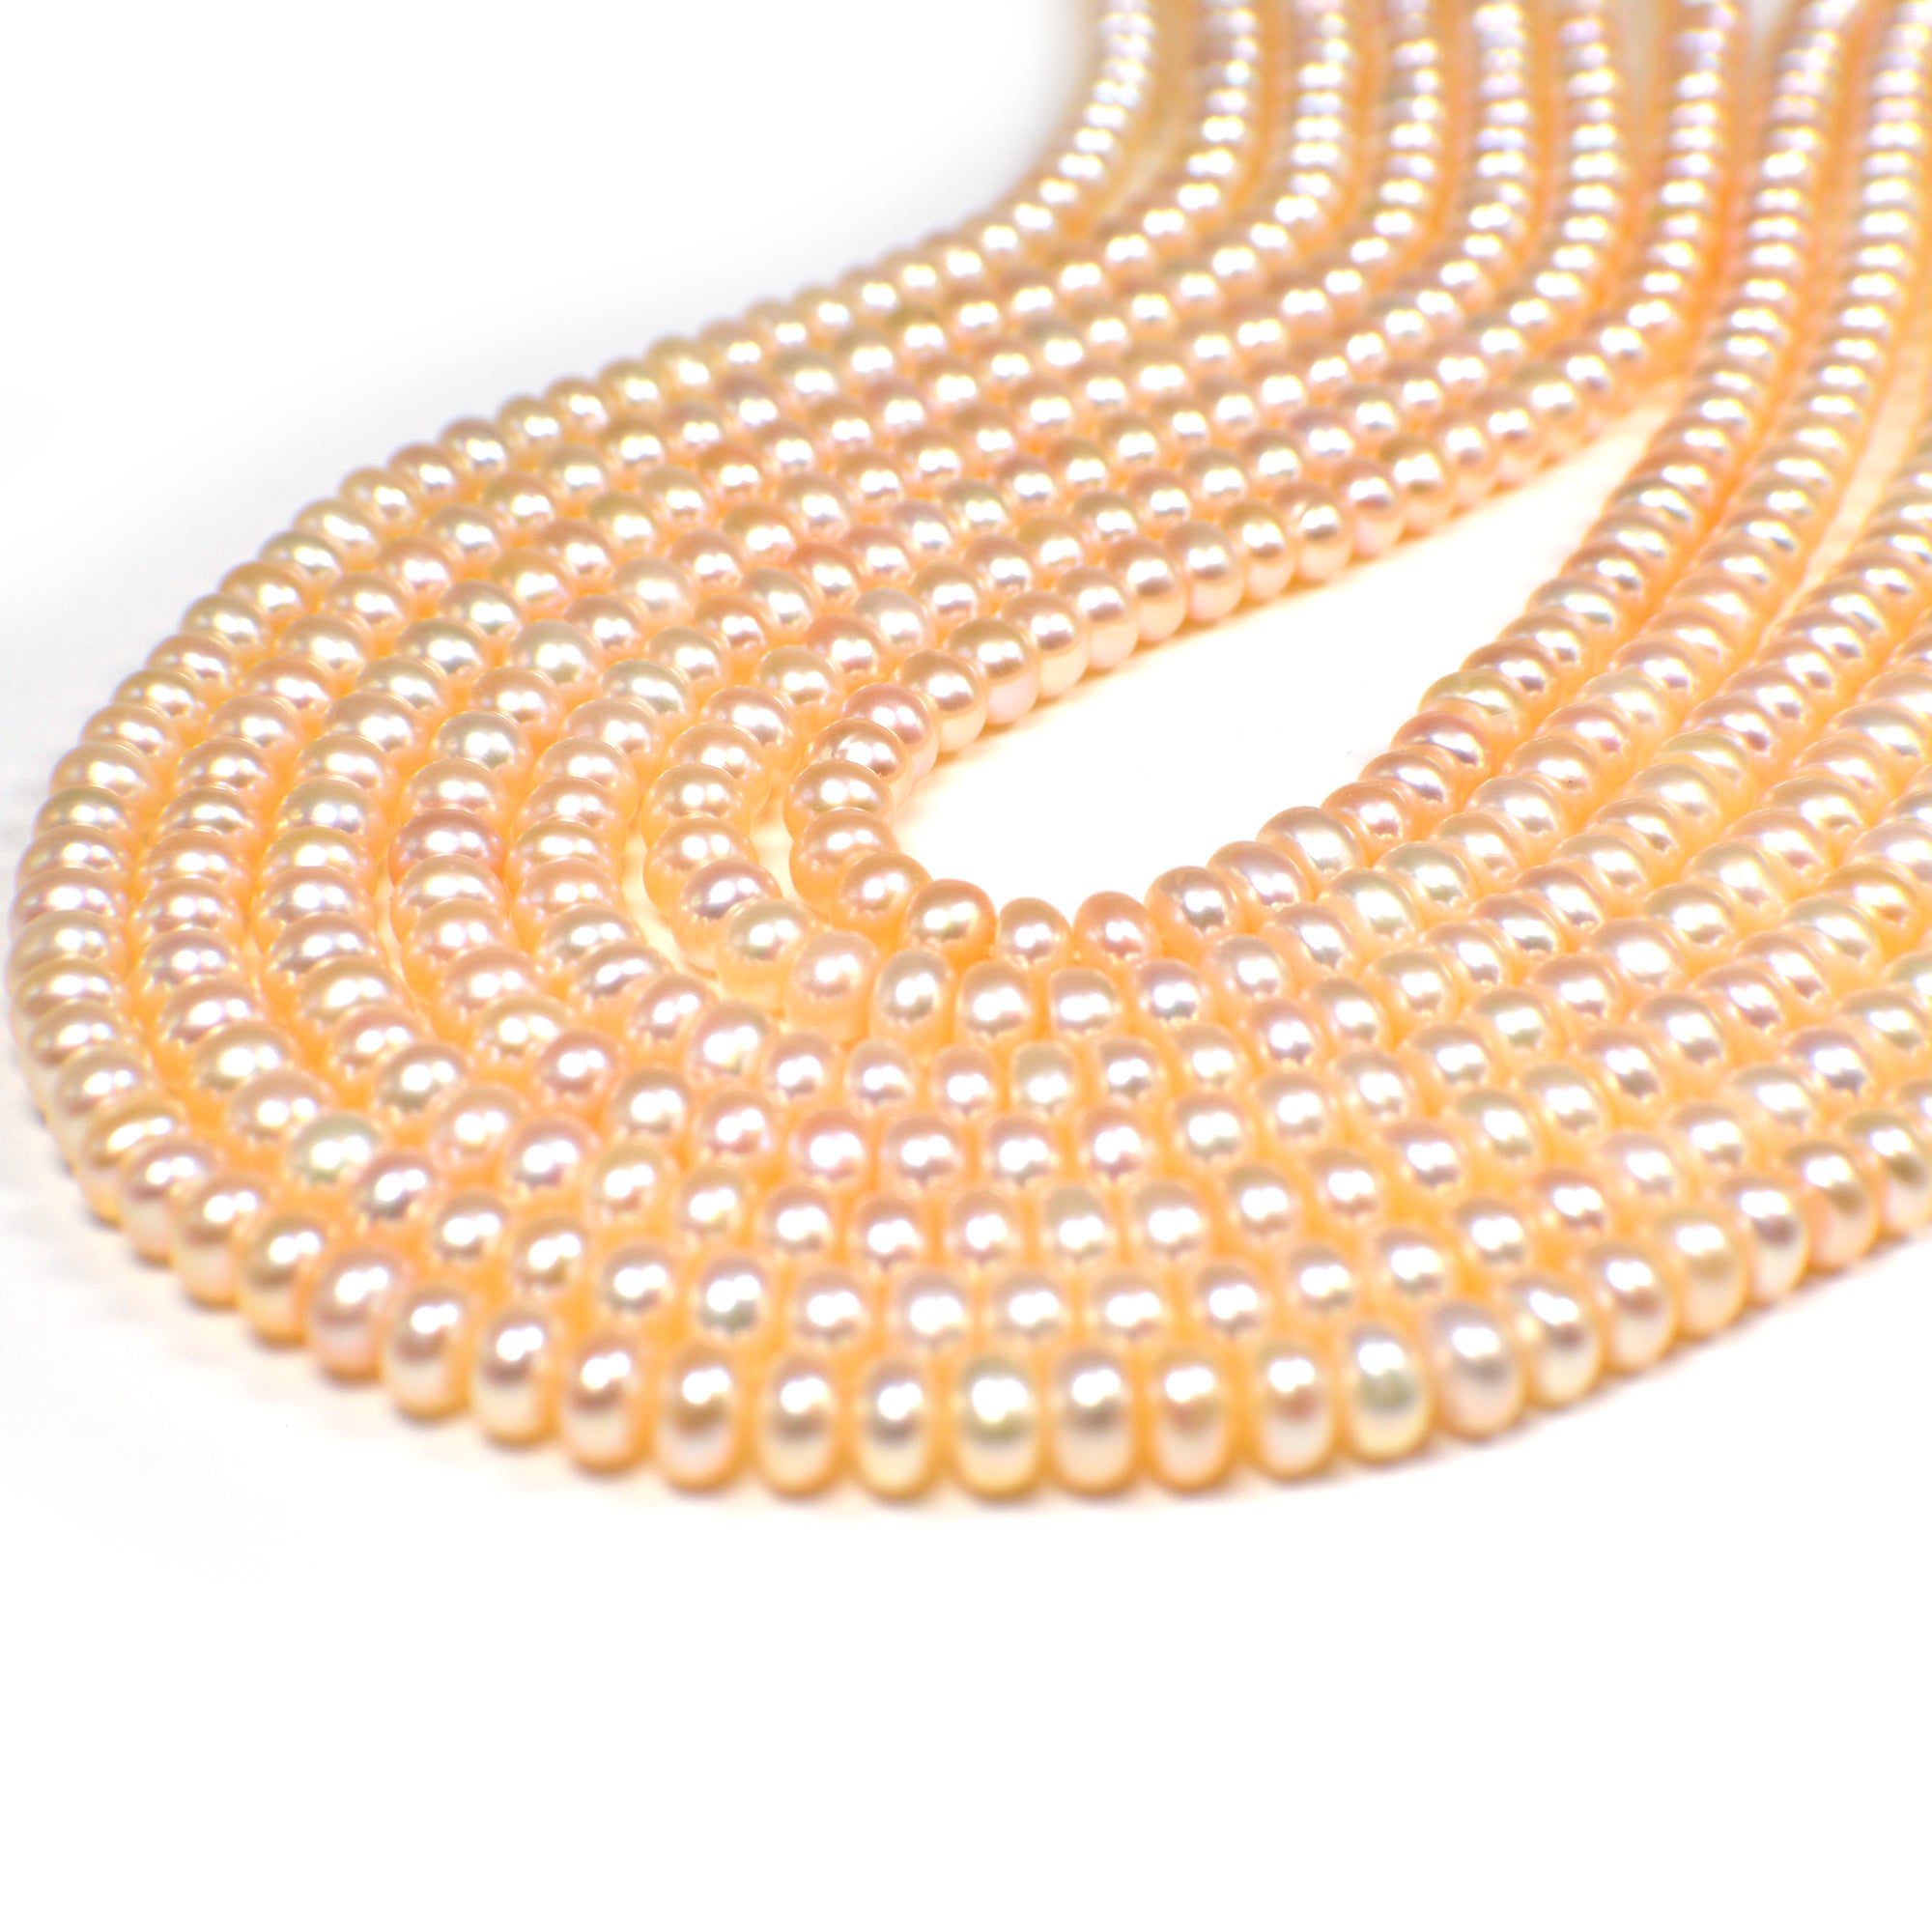 5 - 6 MM Peach Button / Rondelle Freshwater Pearls Beads